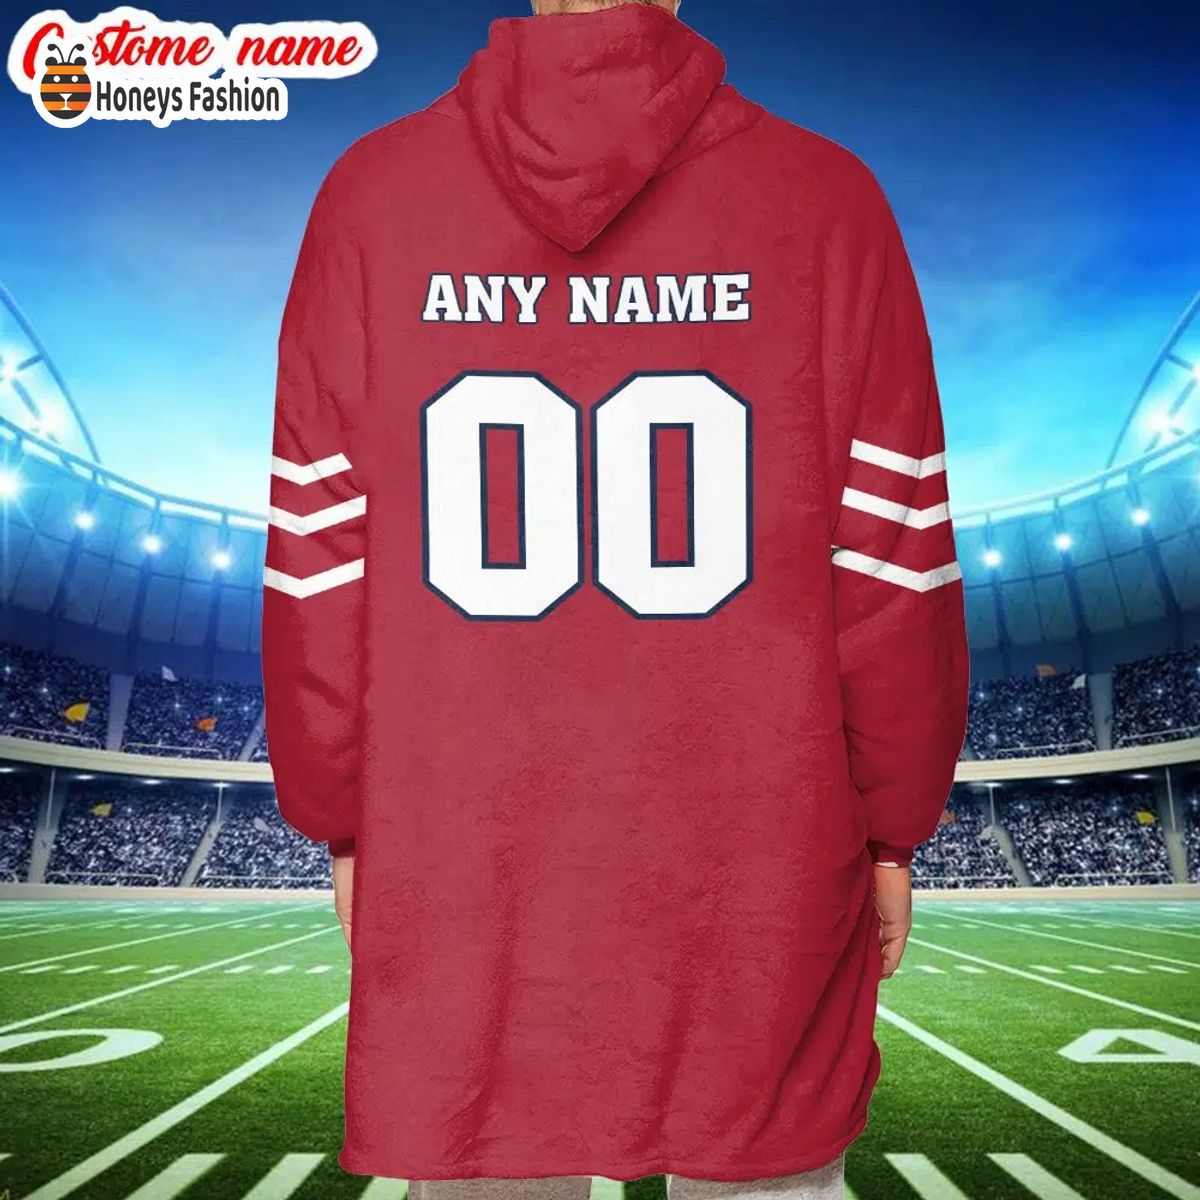 Atlanta Falcons NFL Adidas all day i dream about Falcons blanket hoodie